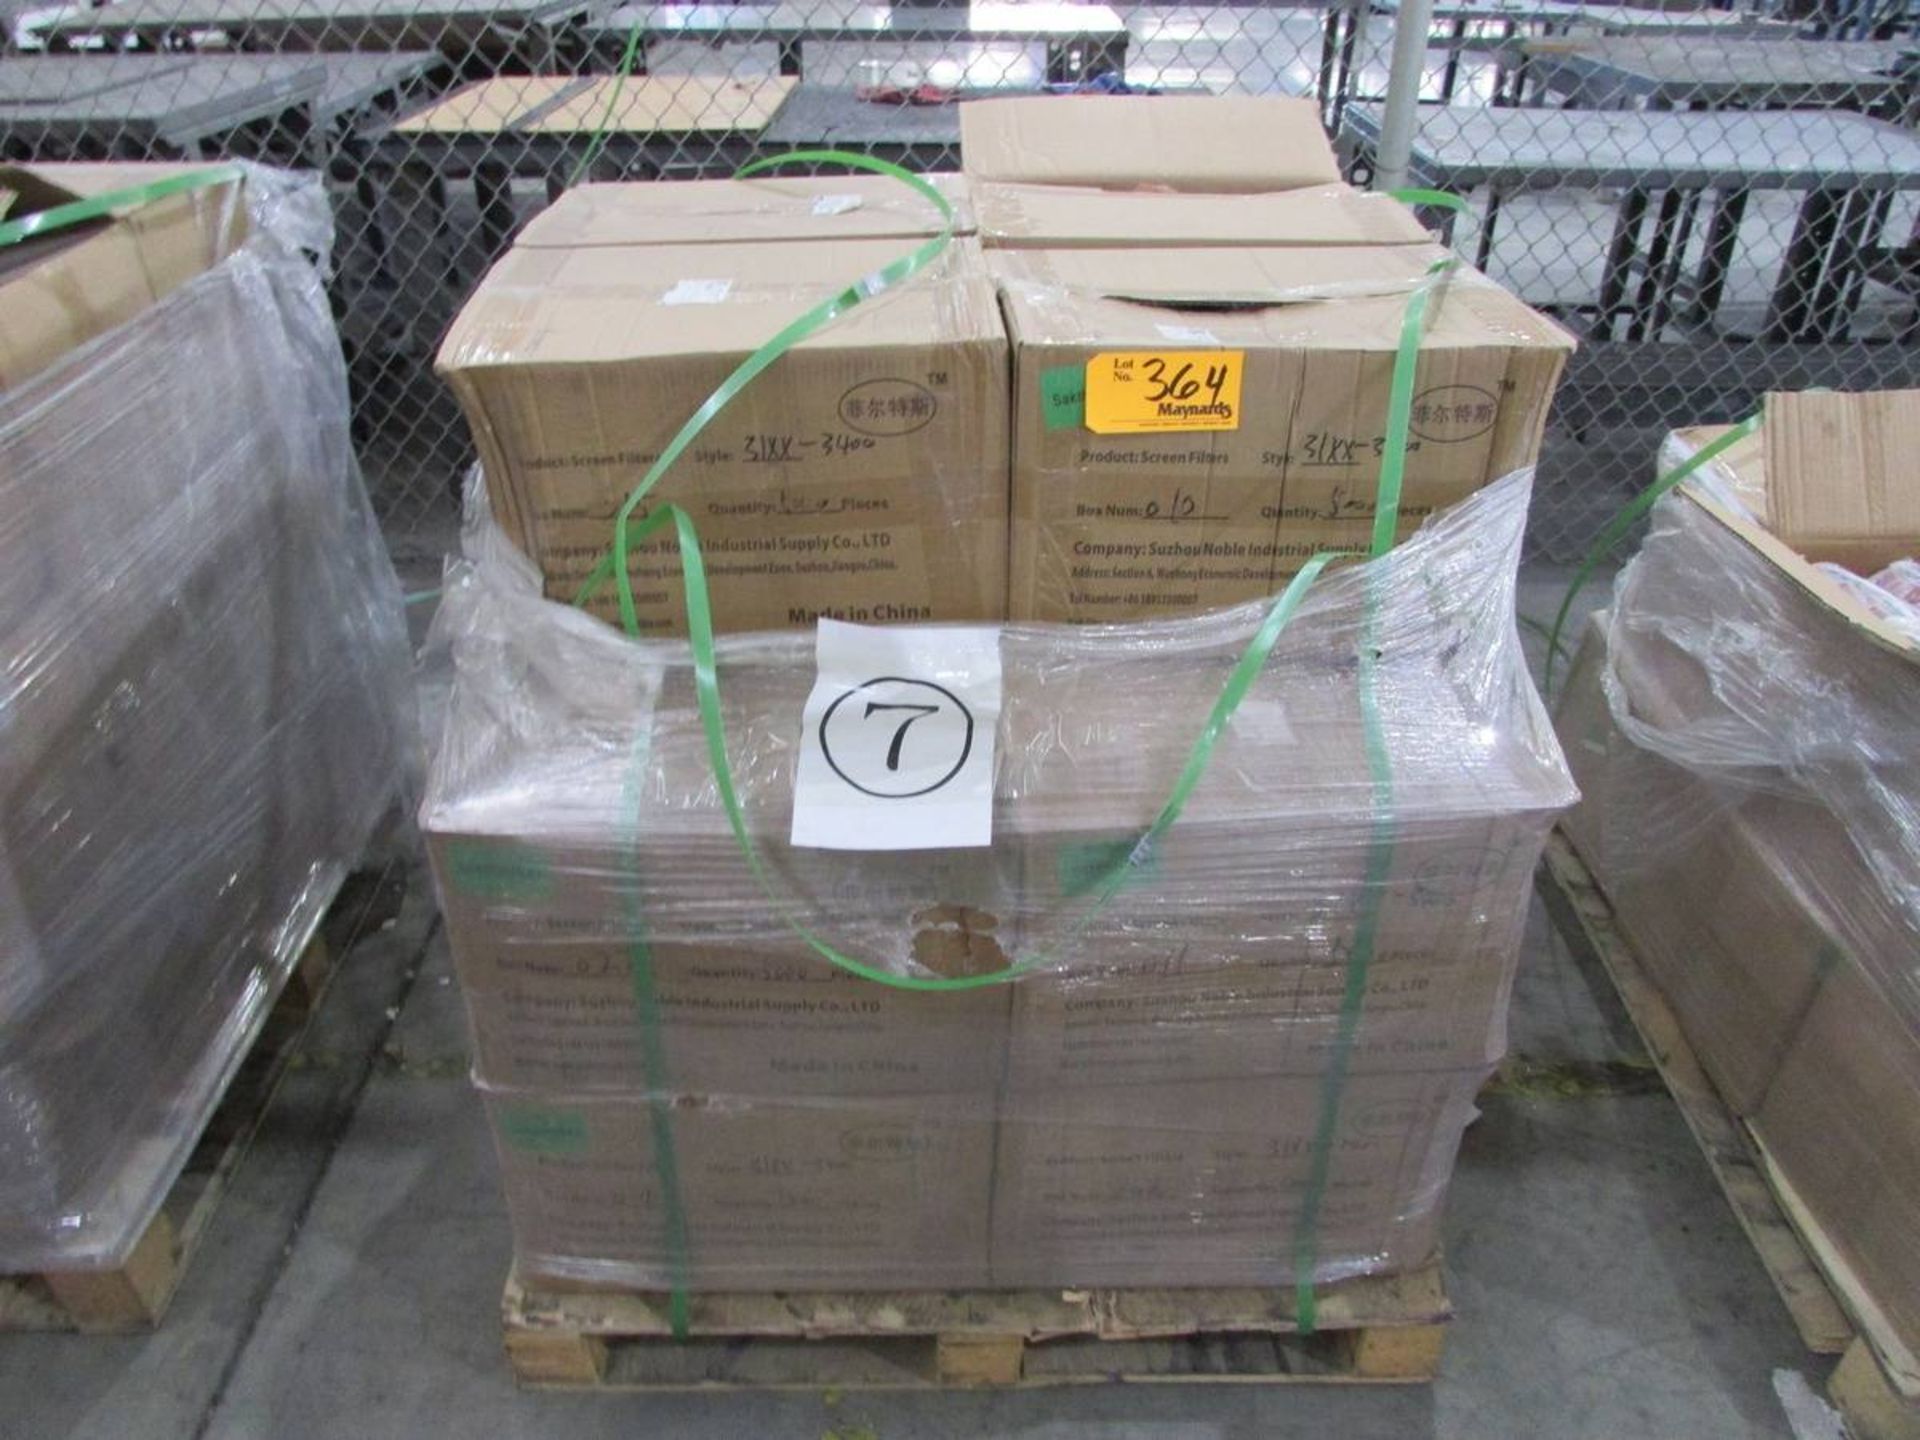 Suzhou Noble Industrial Supply 31XX-3400 Pallets of Screen Filters - Image 7 of 8